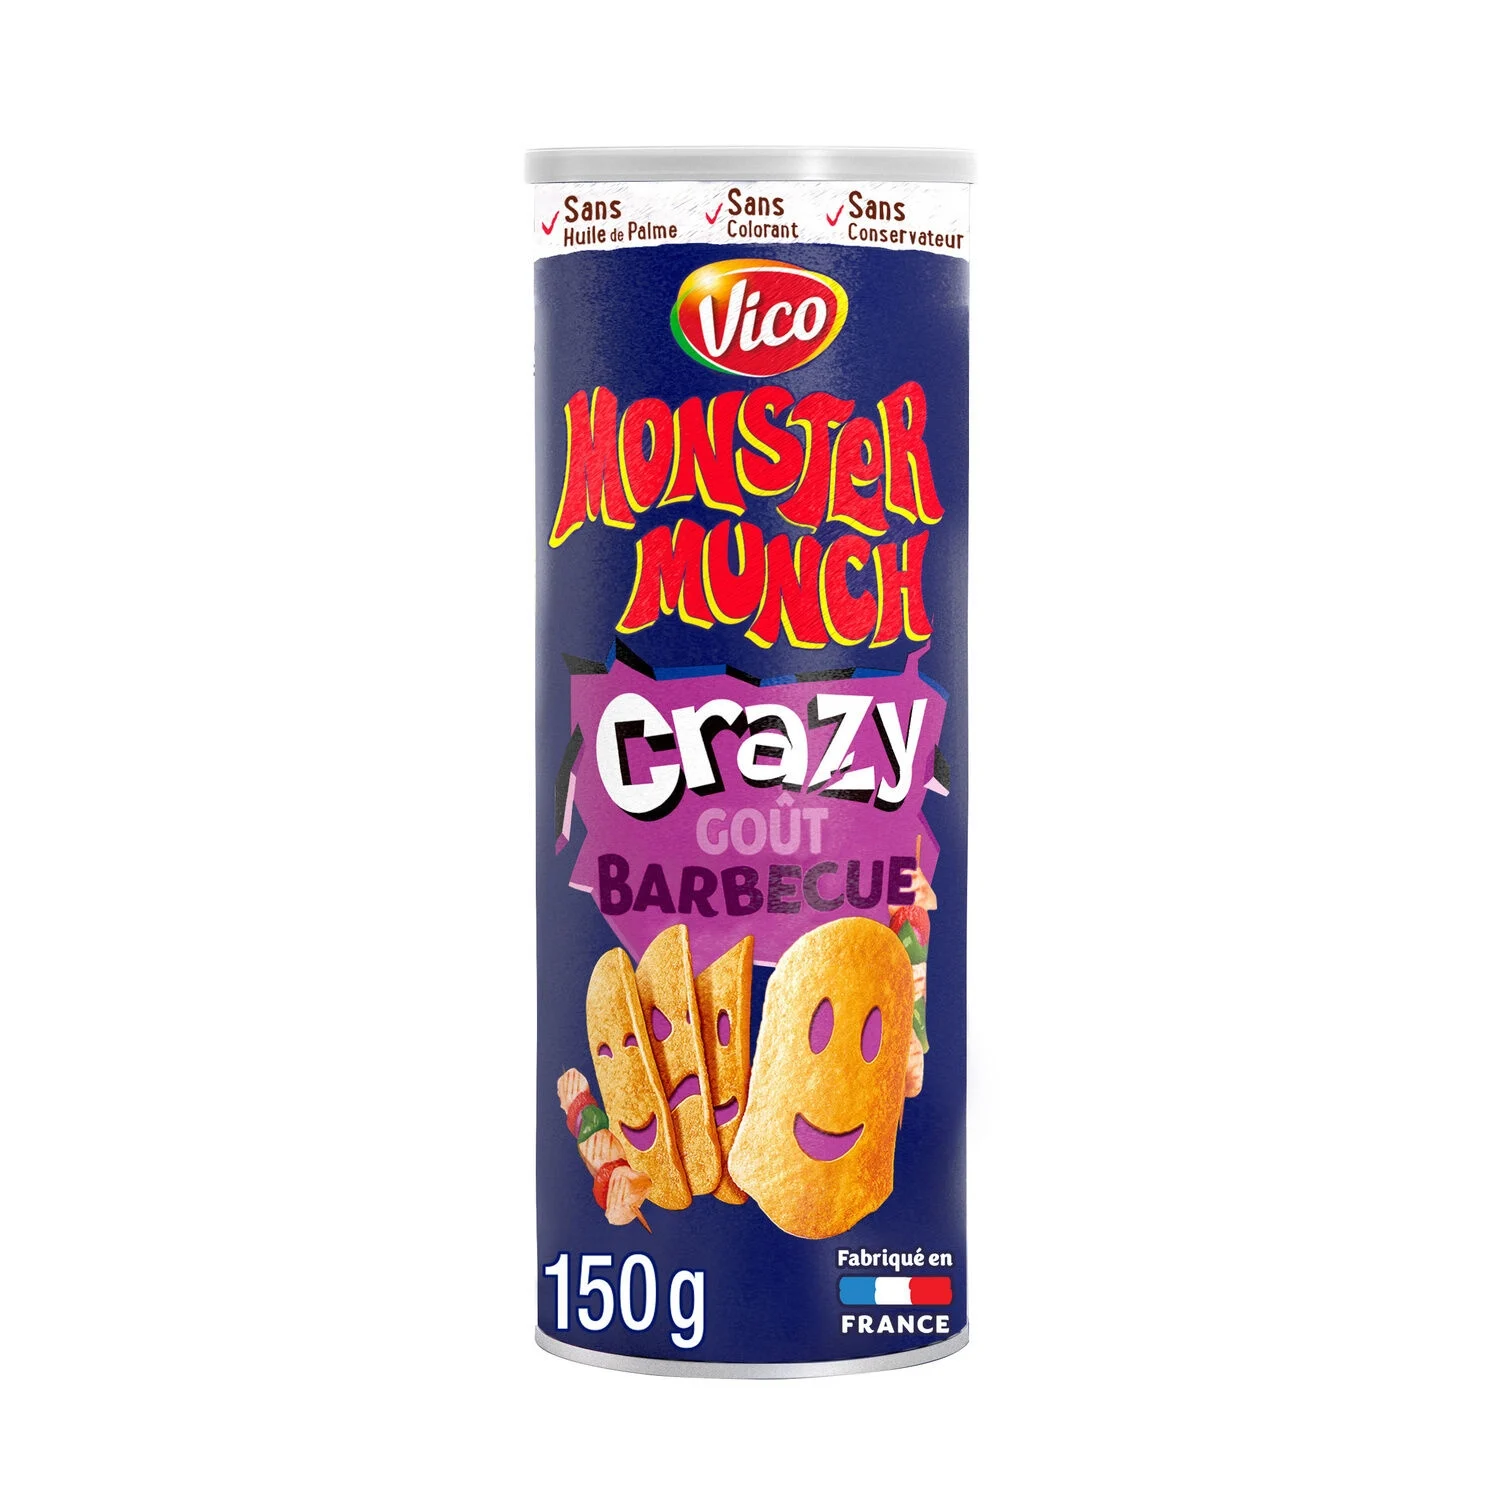 Mm Crazy Gout Barbecue 150g